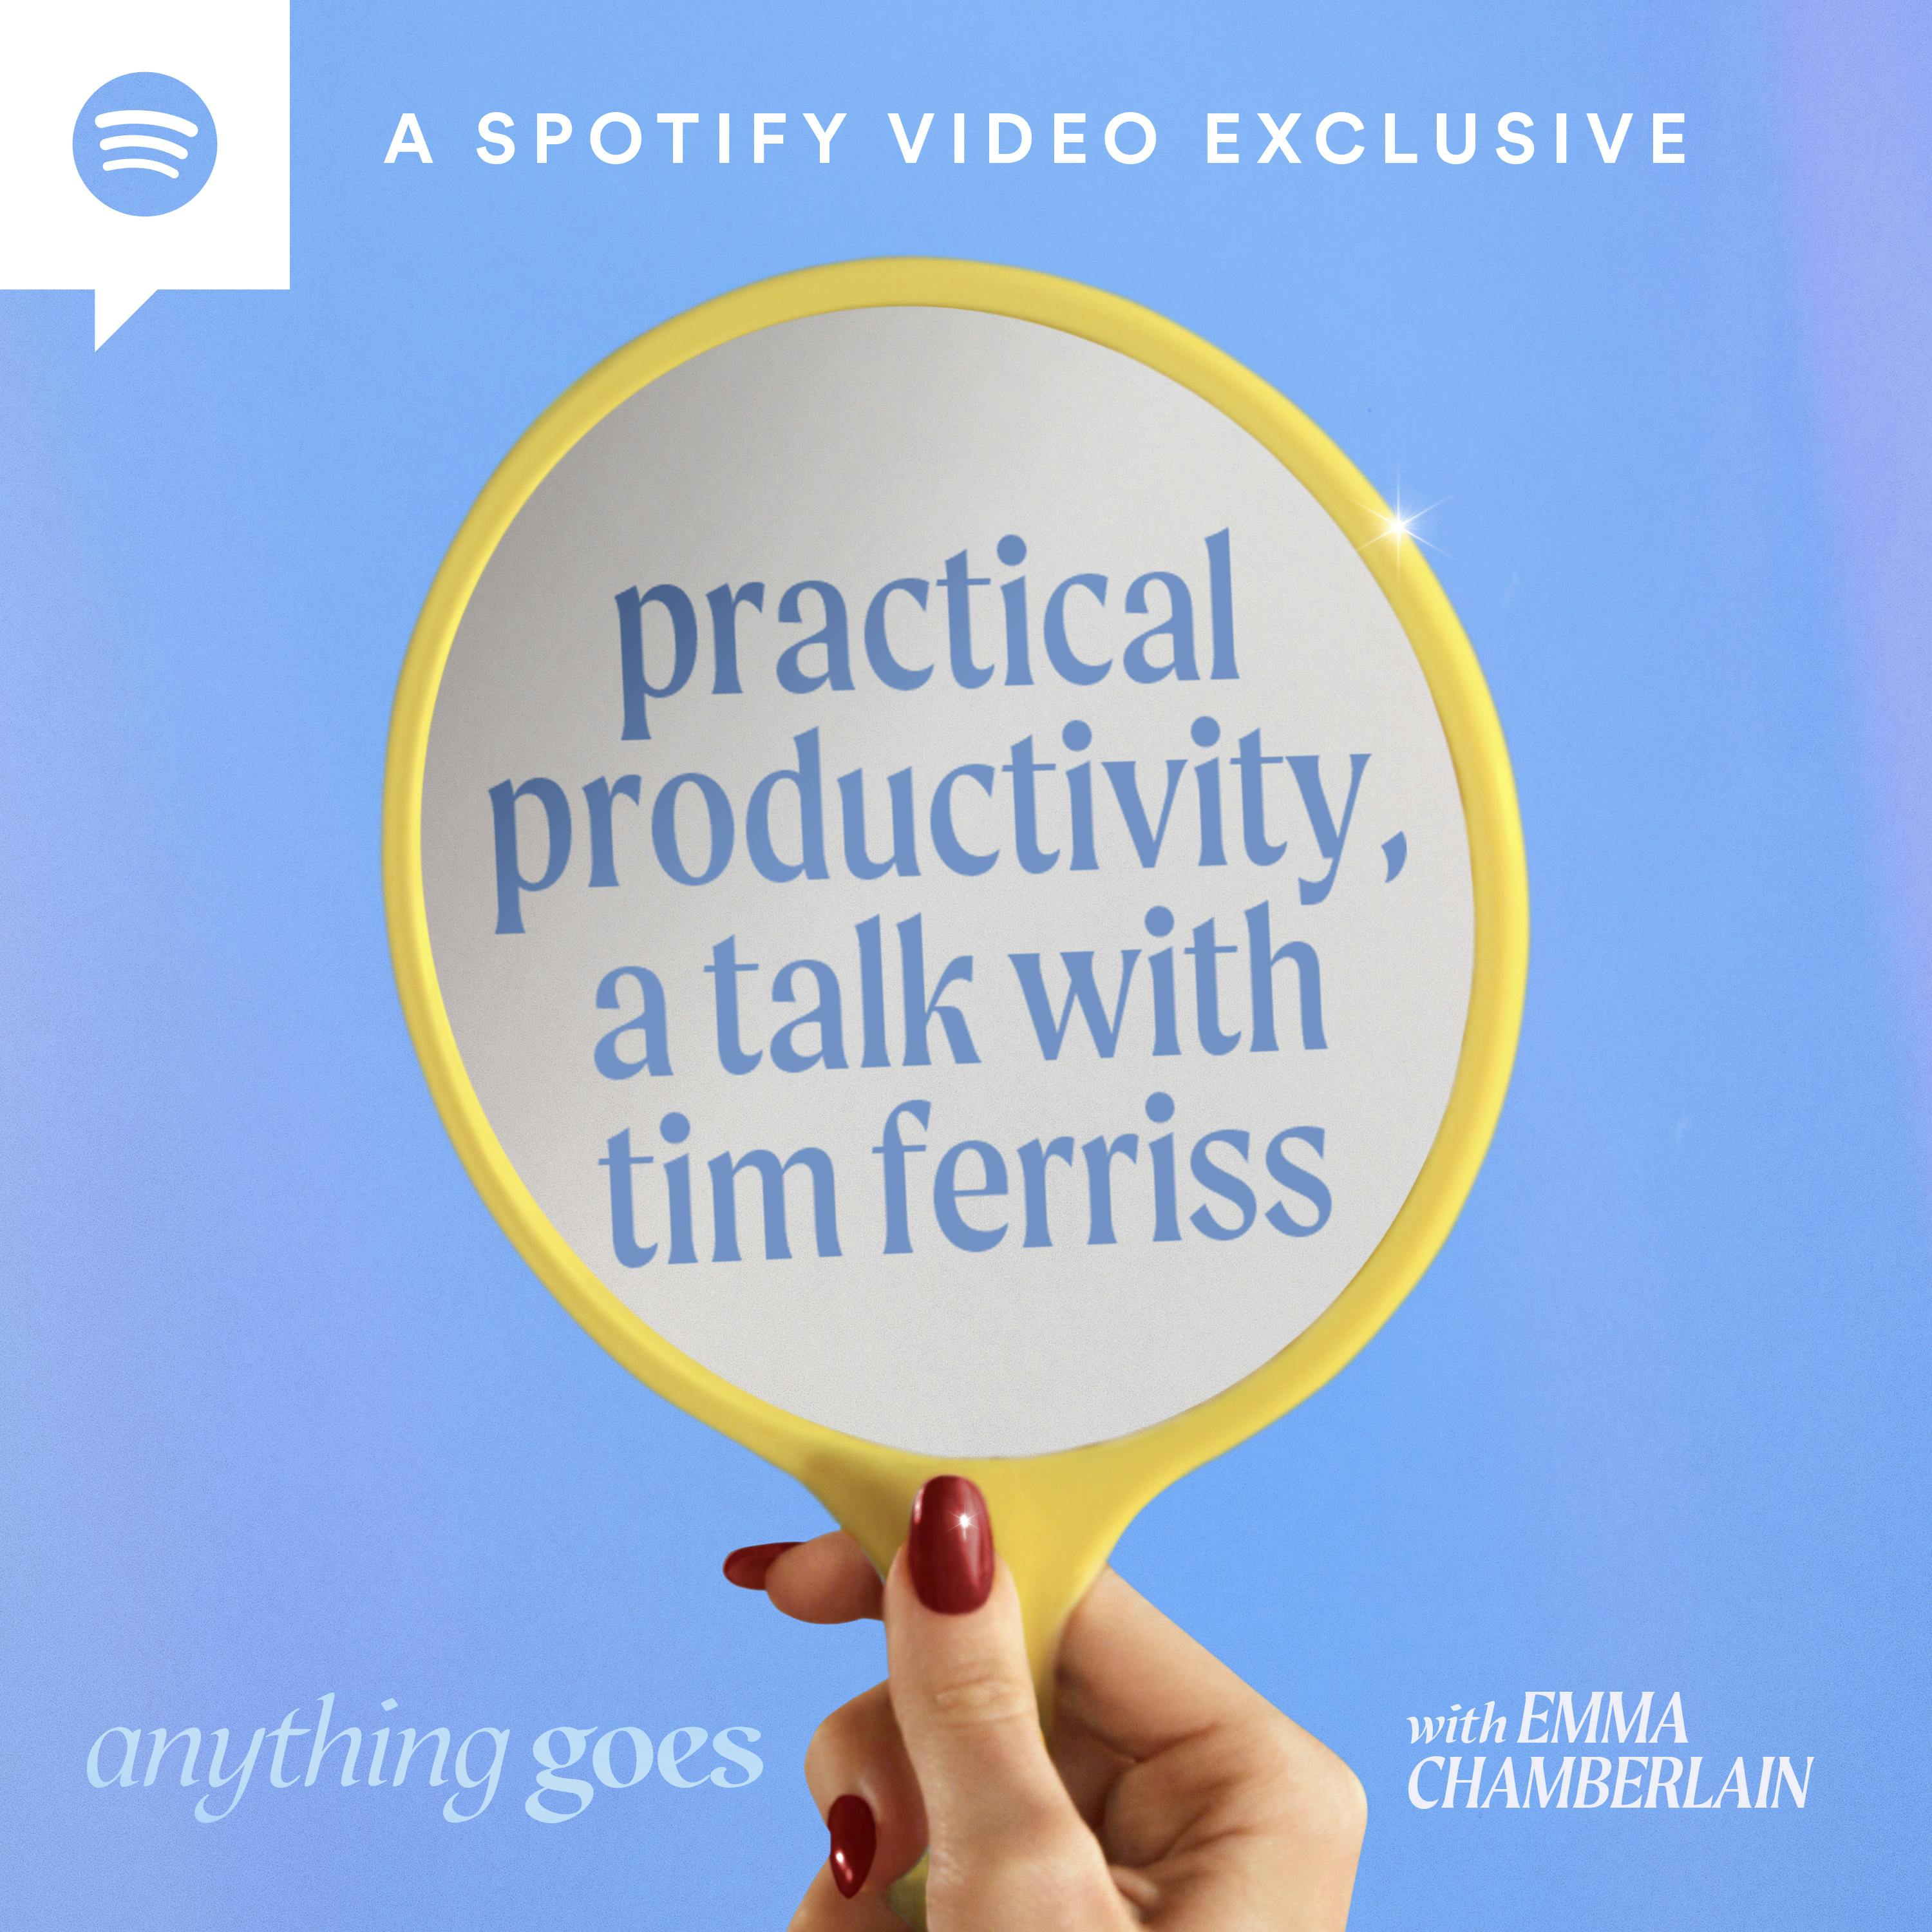 practical productivity, a talk with tim ferriss [video]